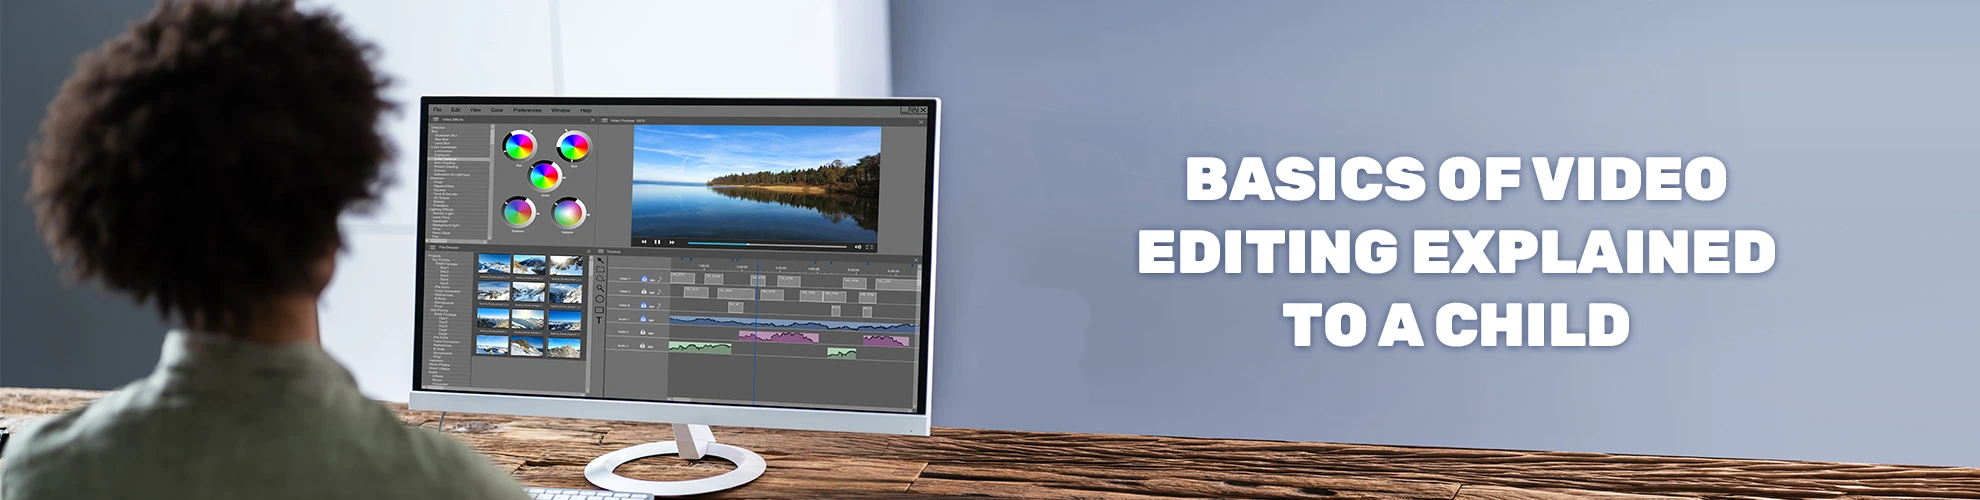 [Video] Basics of Video Editing Explained To A Child